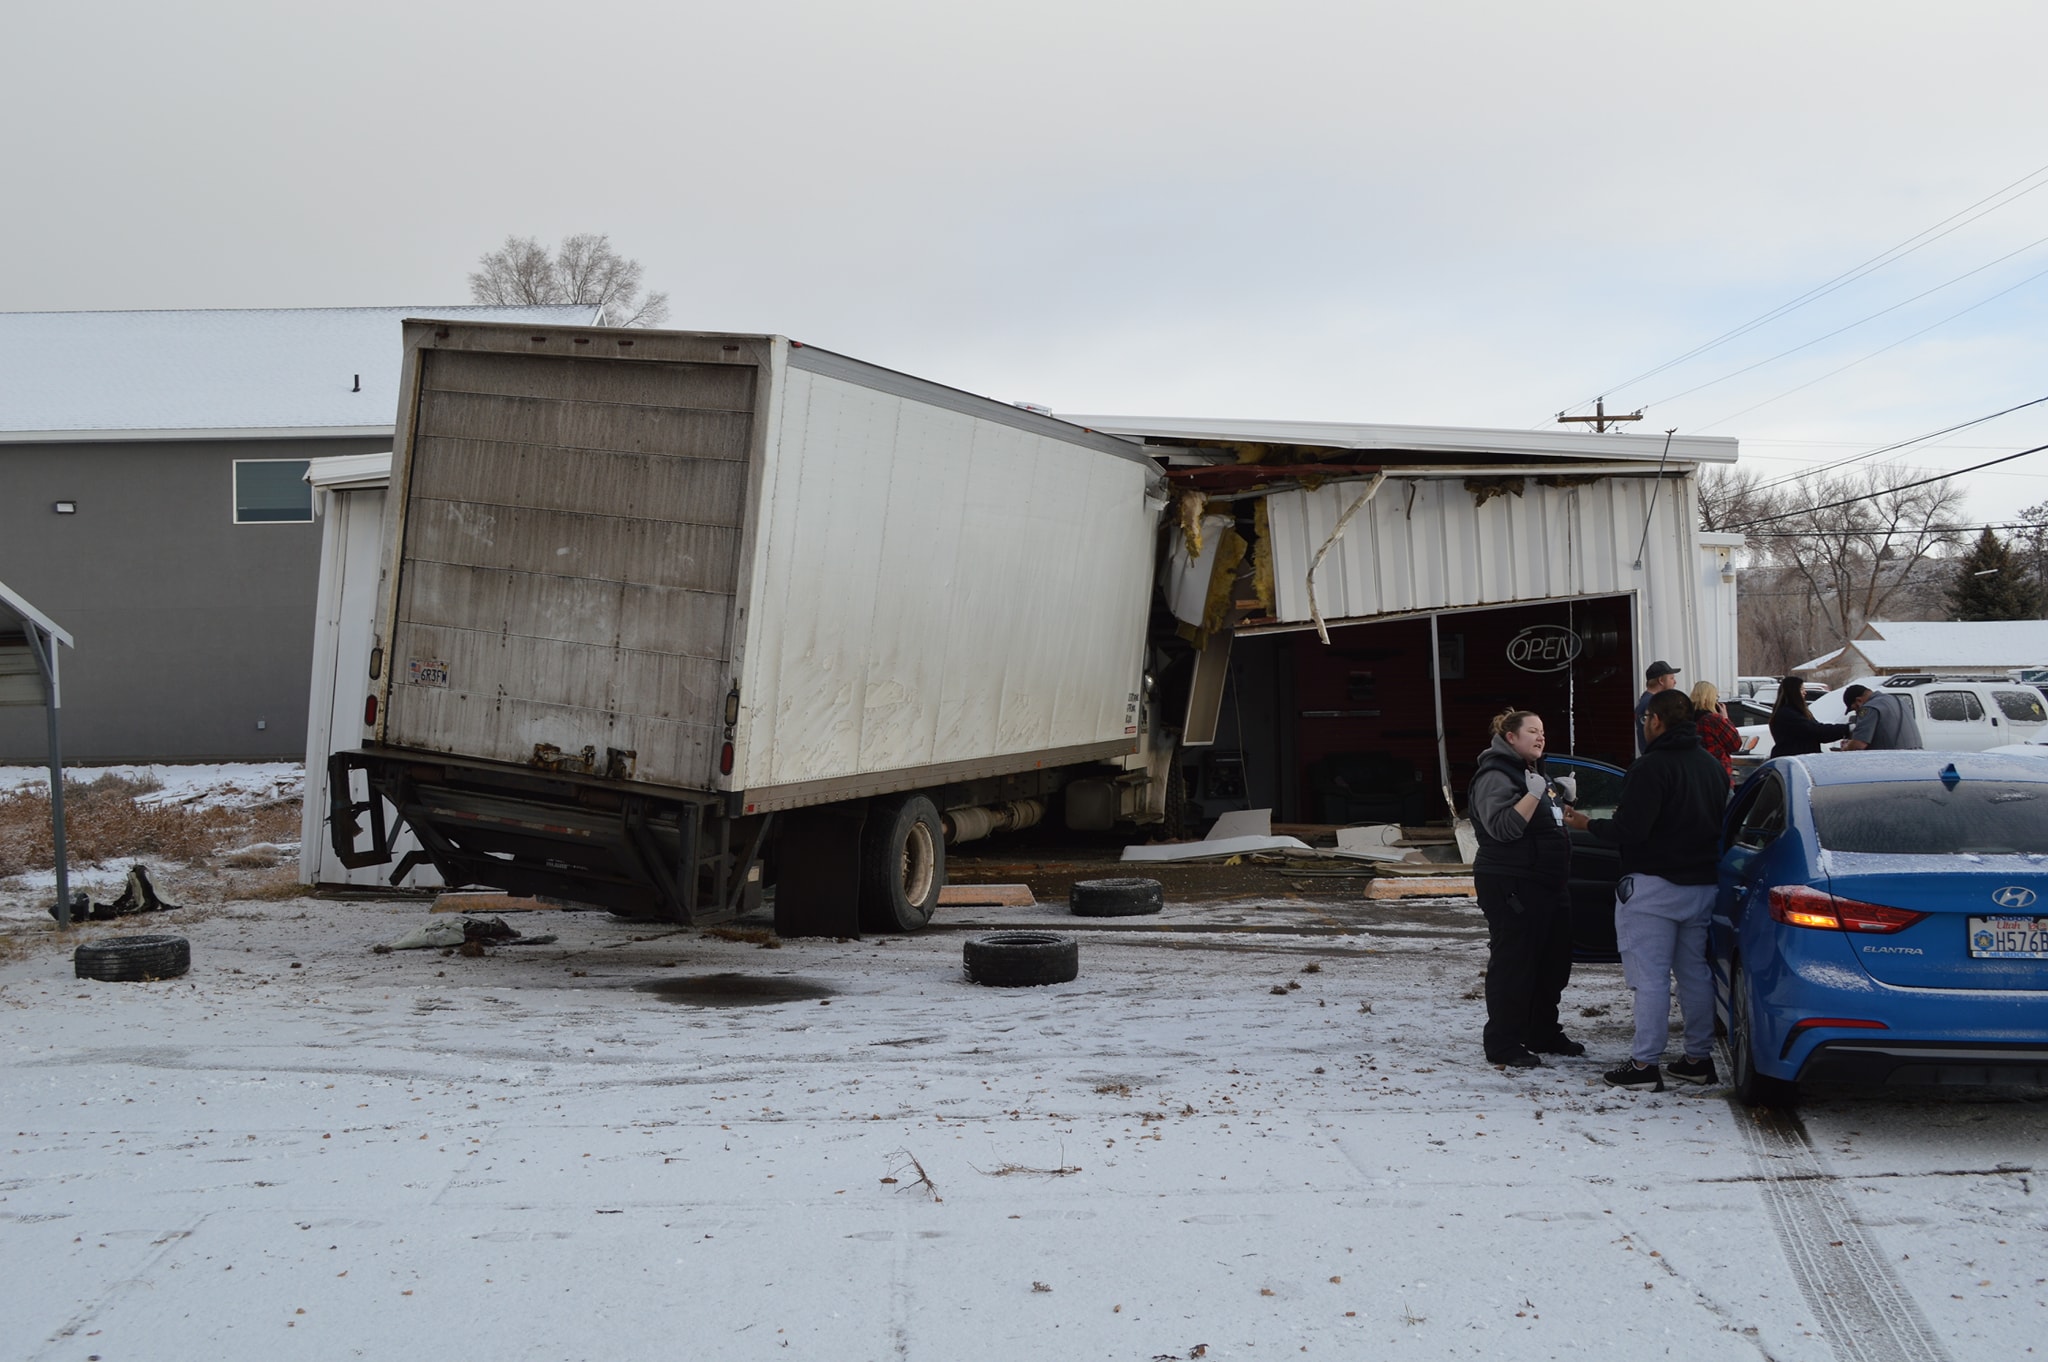 A truck slid off the road and crashed into a building in Duchesne City Tuesday morning. Authorities...